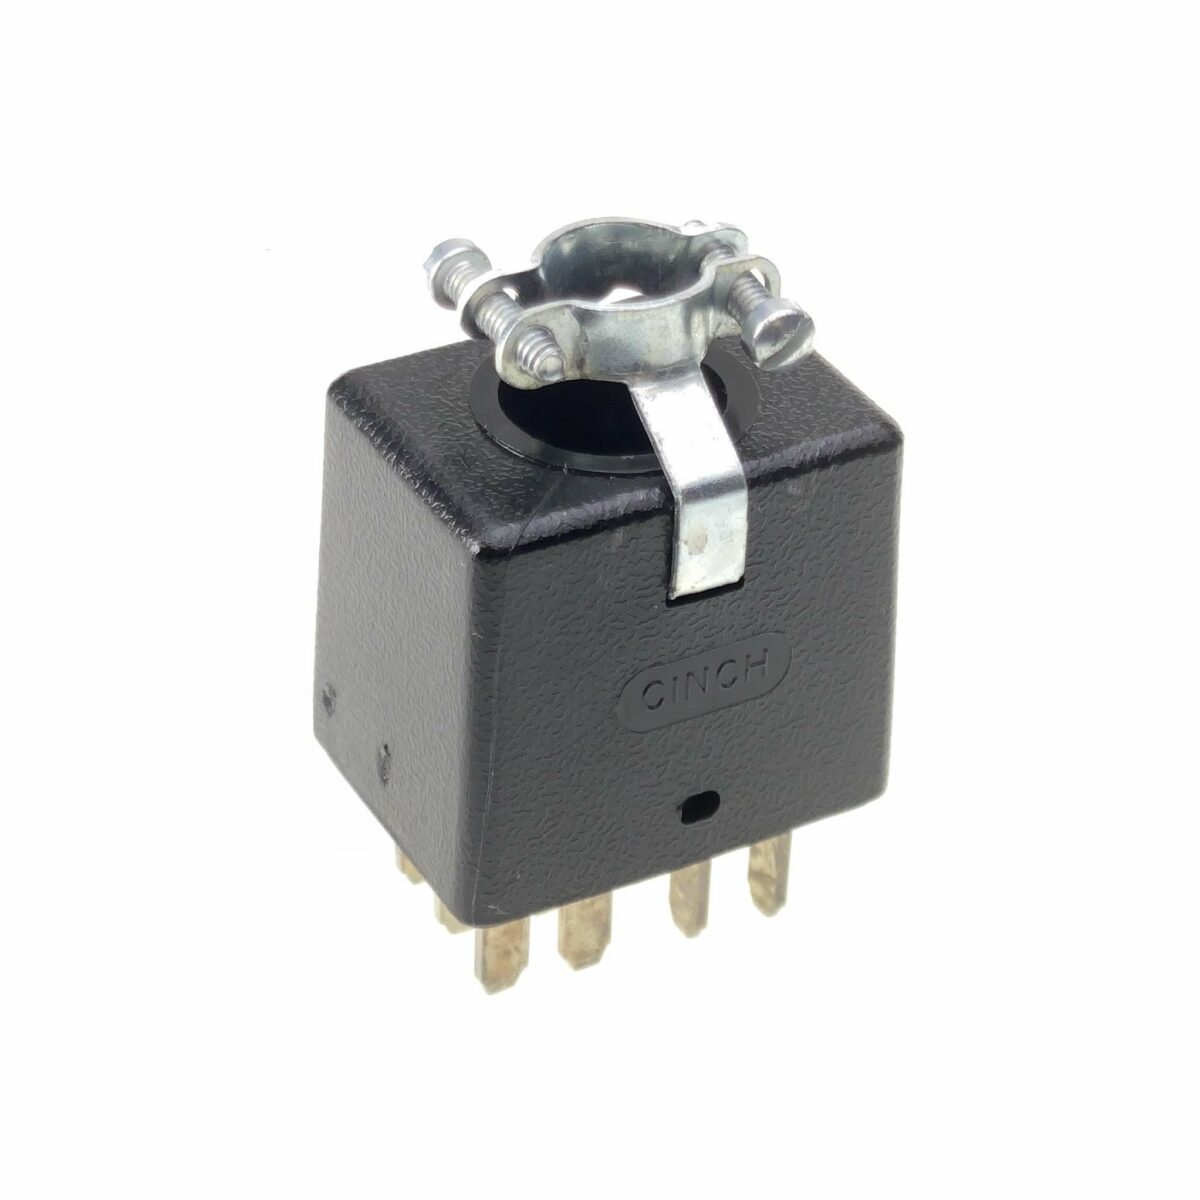 Photo of DBX 165, 165A Stereo Link Connector back at Analog Classics